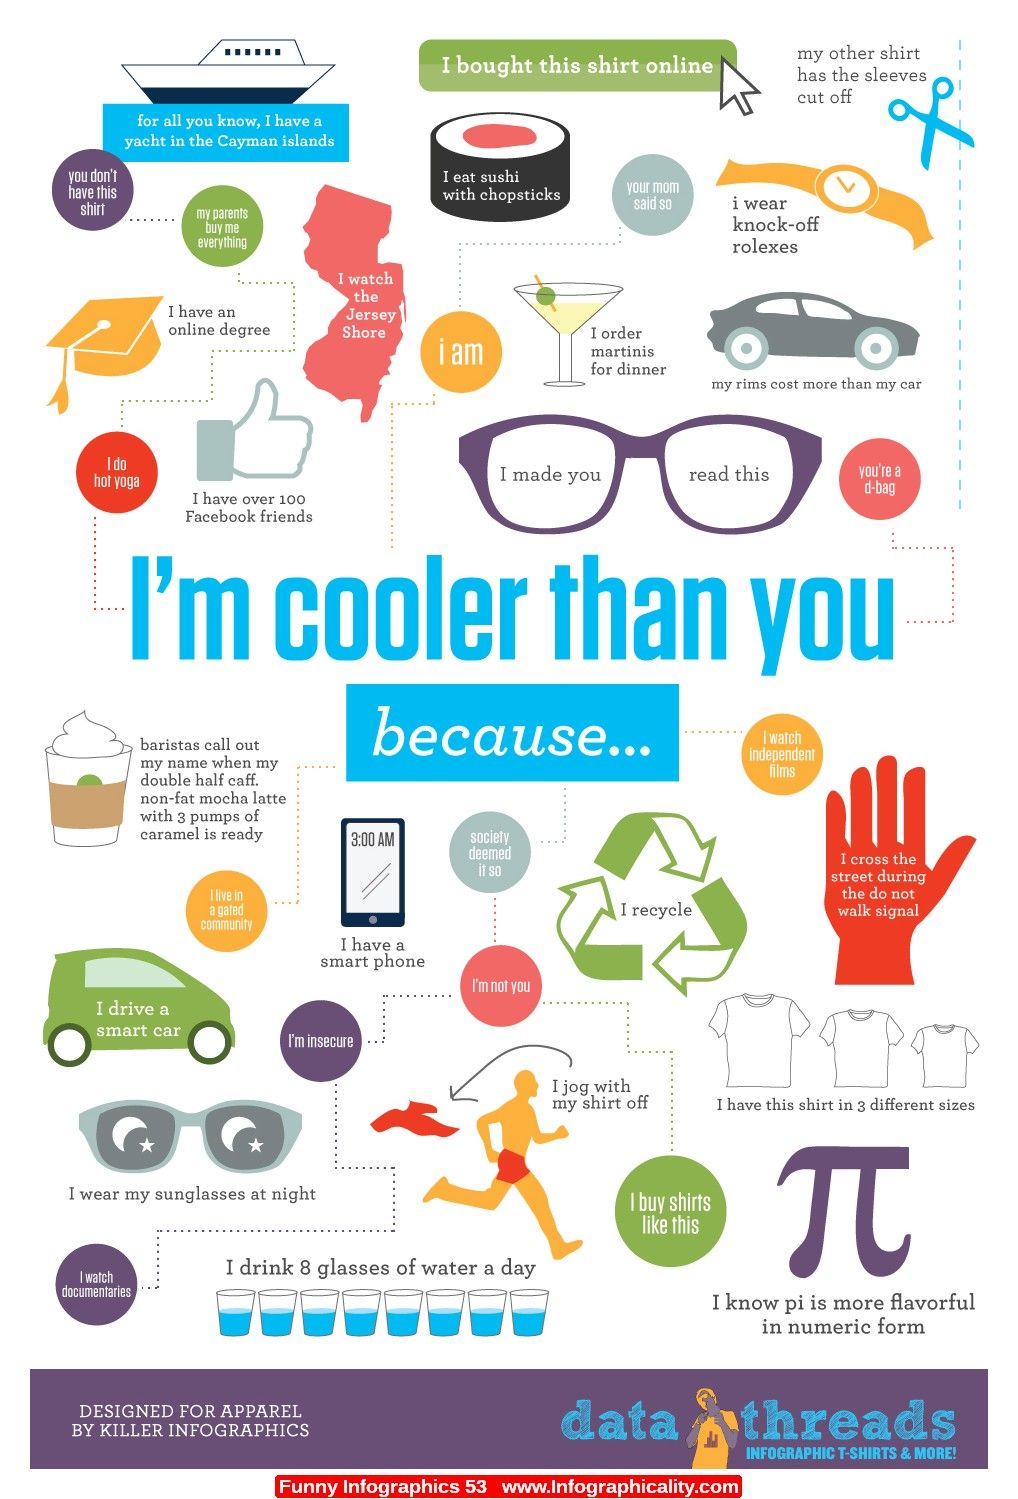 Funny Infographics - Page 2 of 4 - NerdGraph Infographics